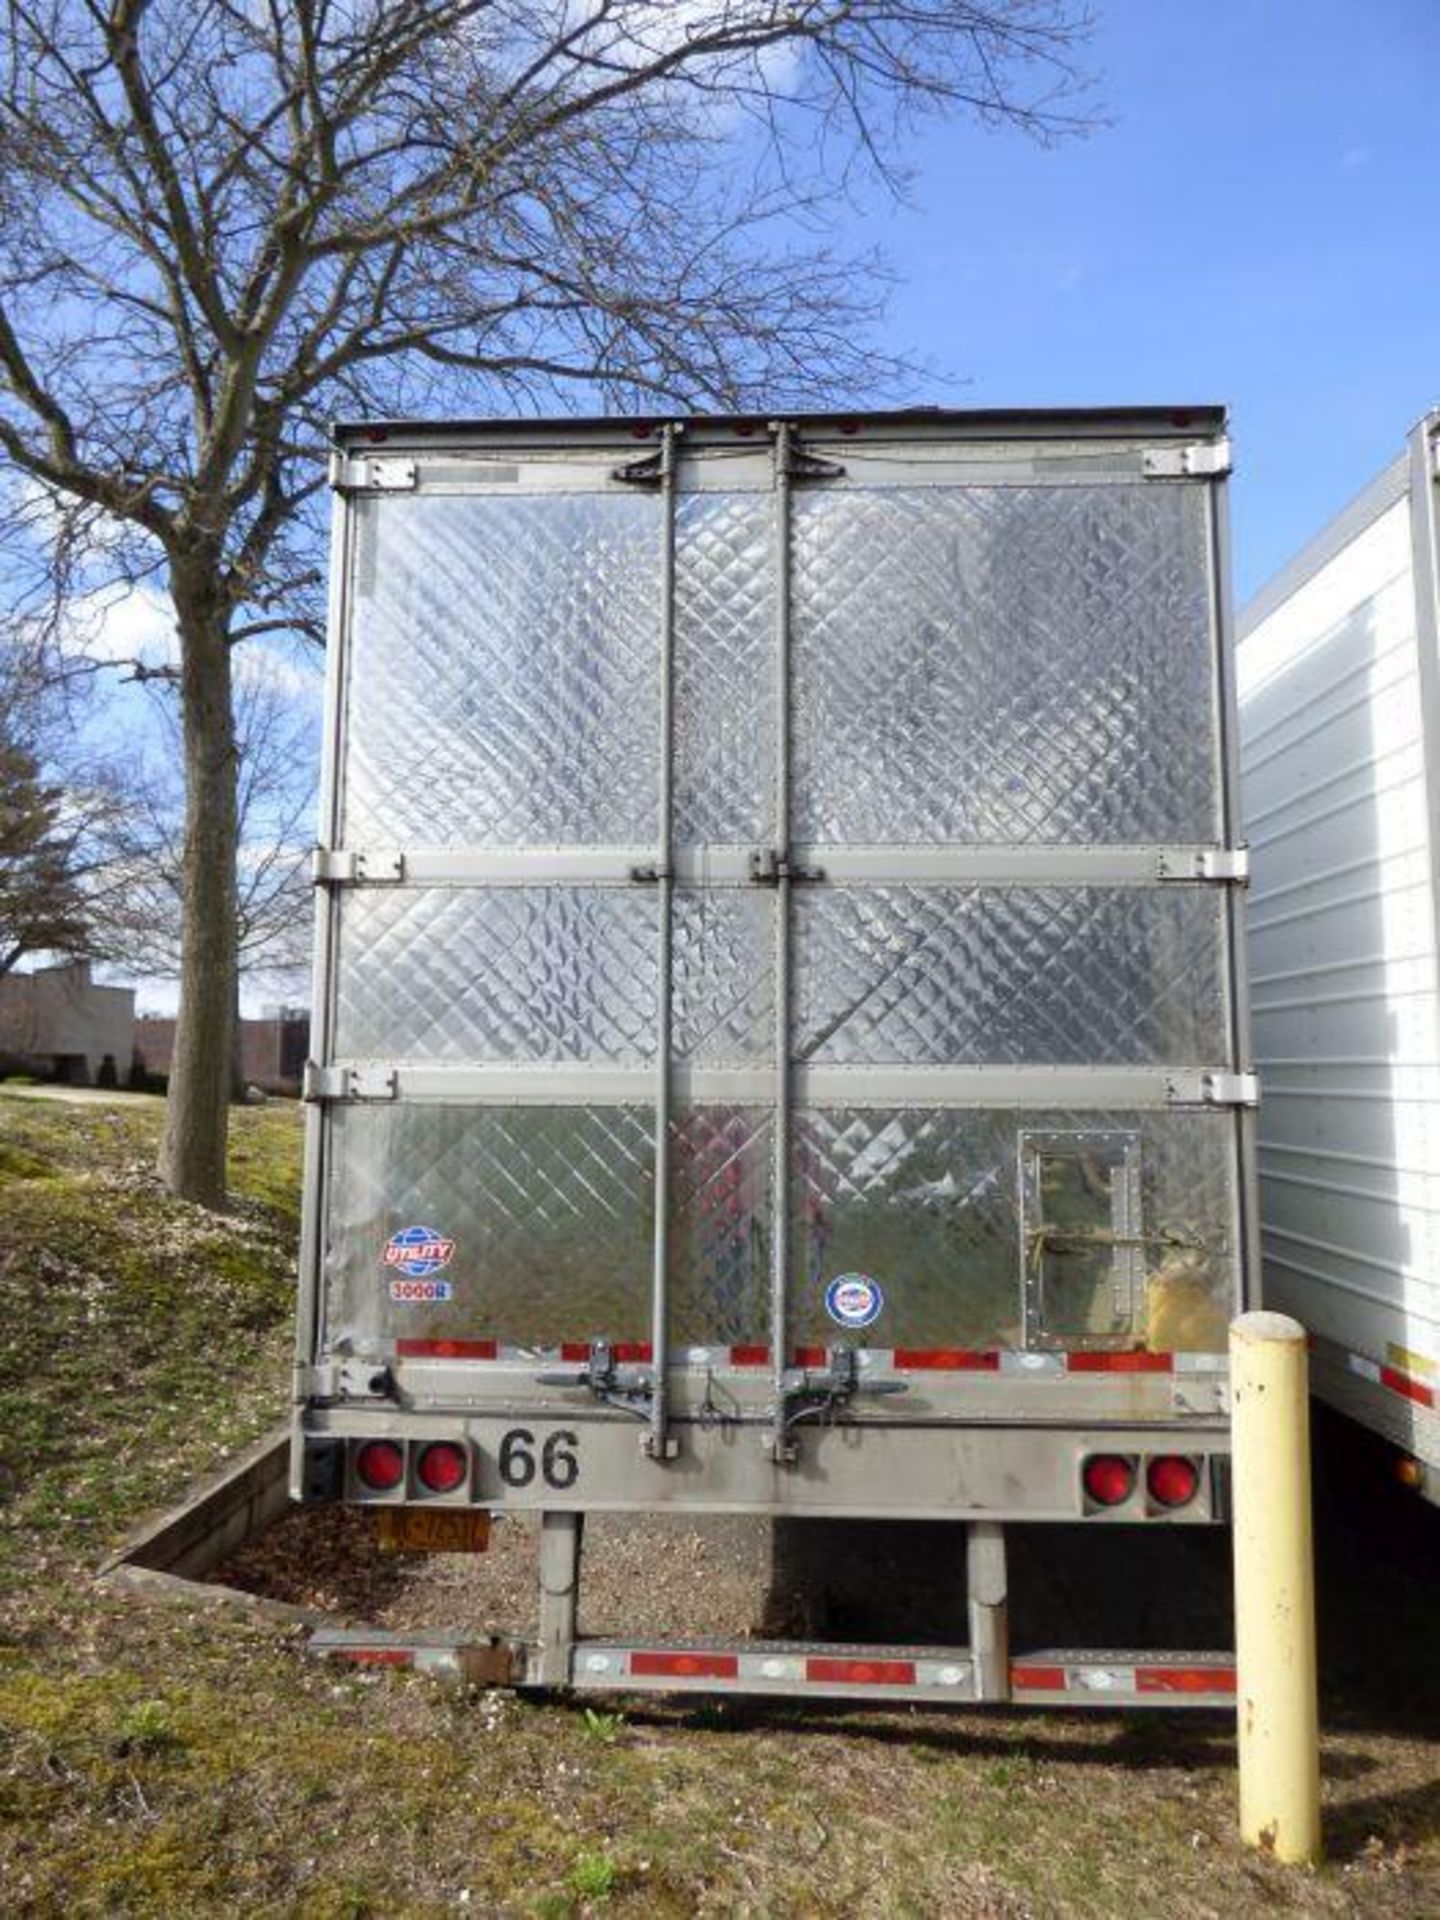 2013 Utility Reefer Trailer, 53 Foot - Image 12 of 14